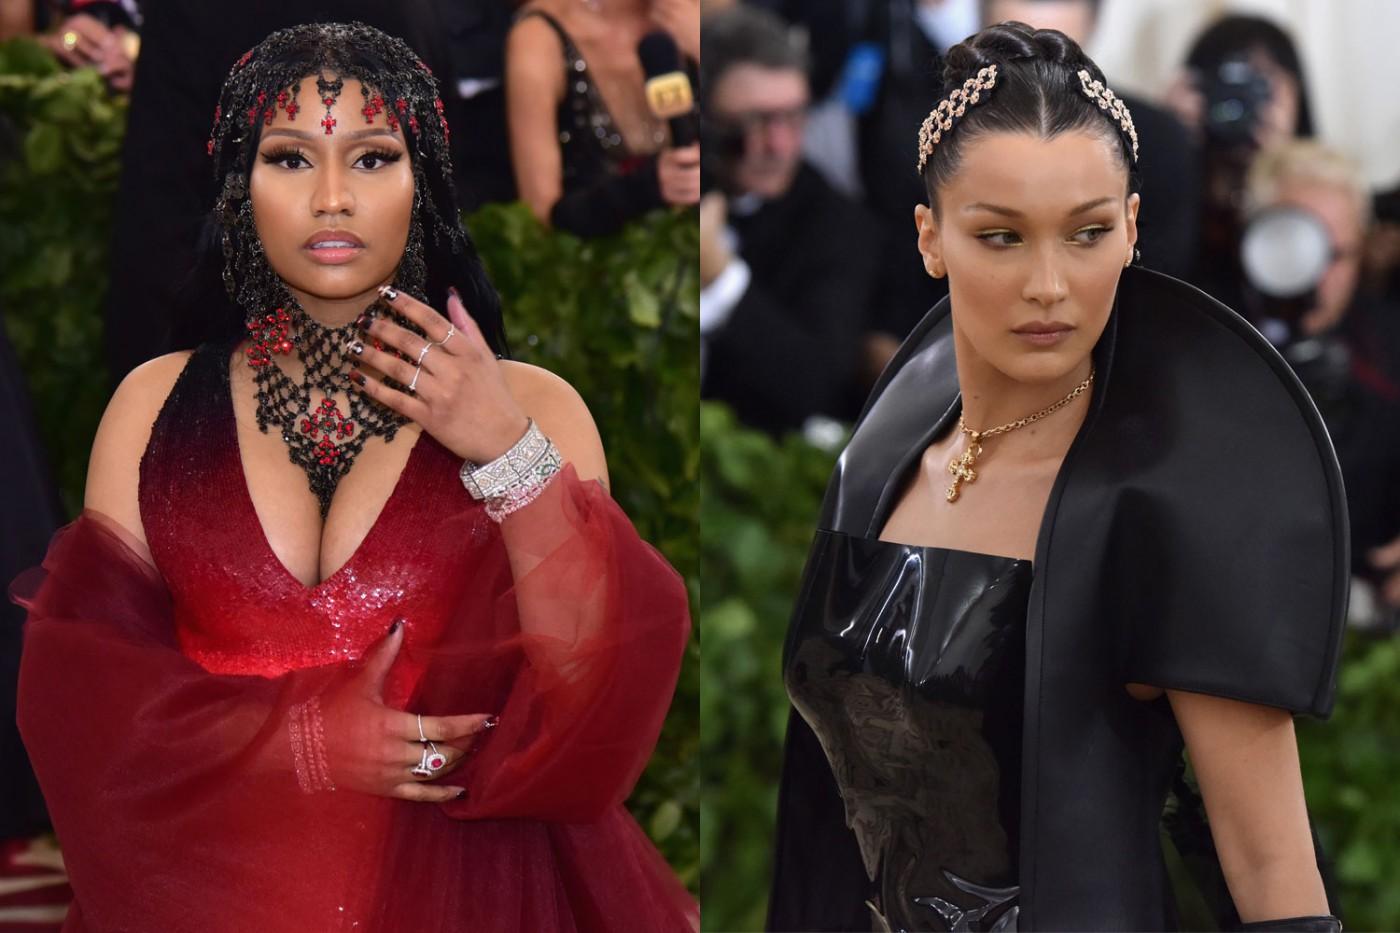 12 Mini Music Videos From Inside the Met Gala That Will Give You Life